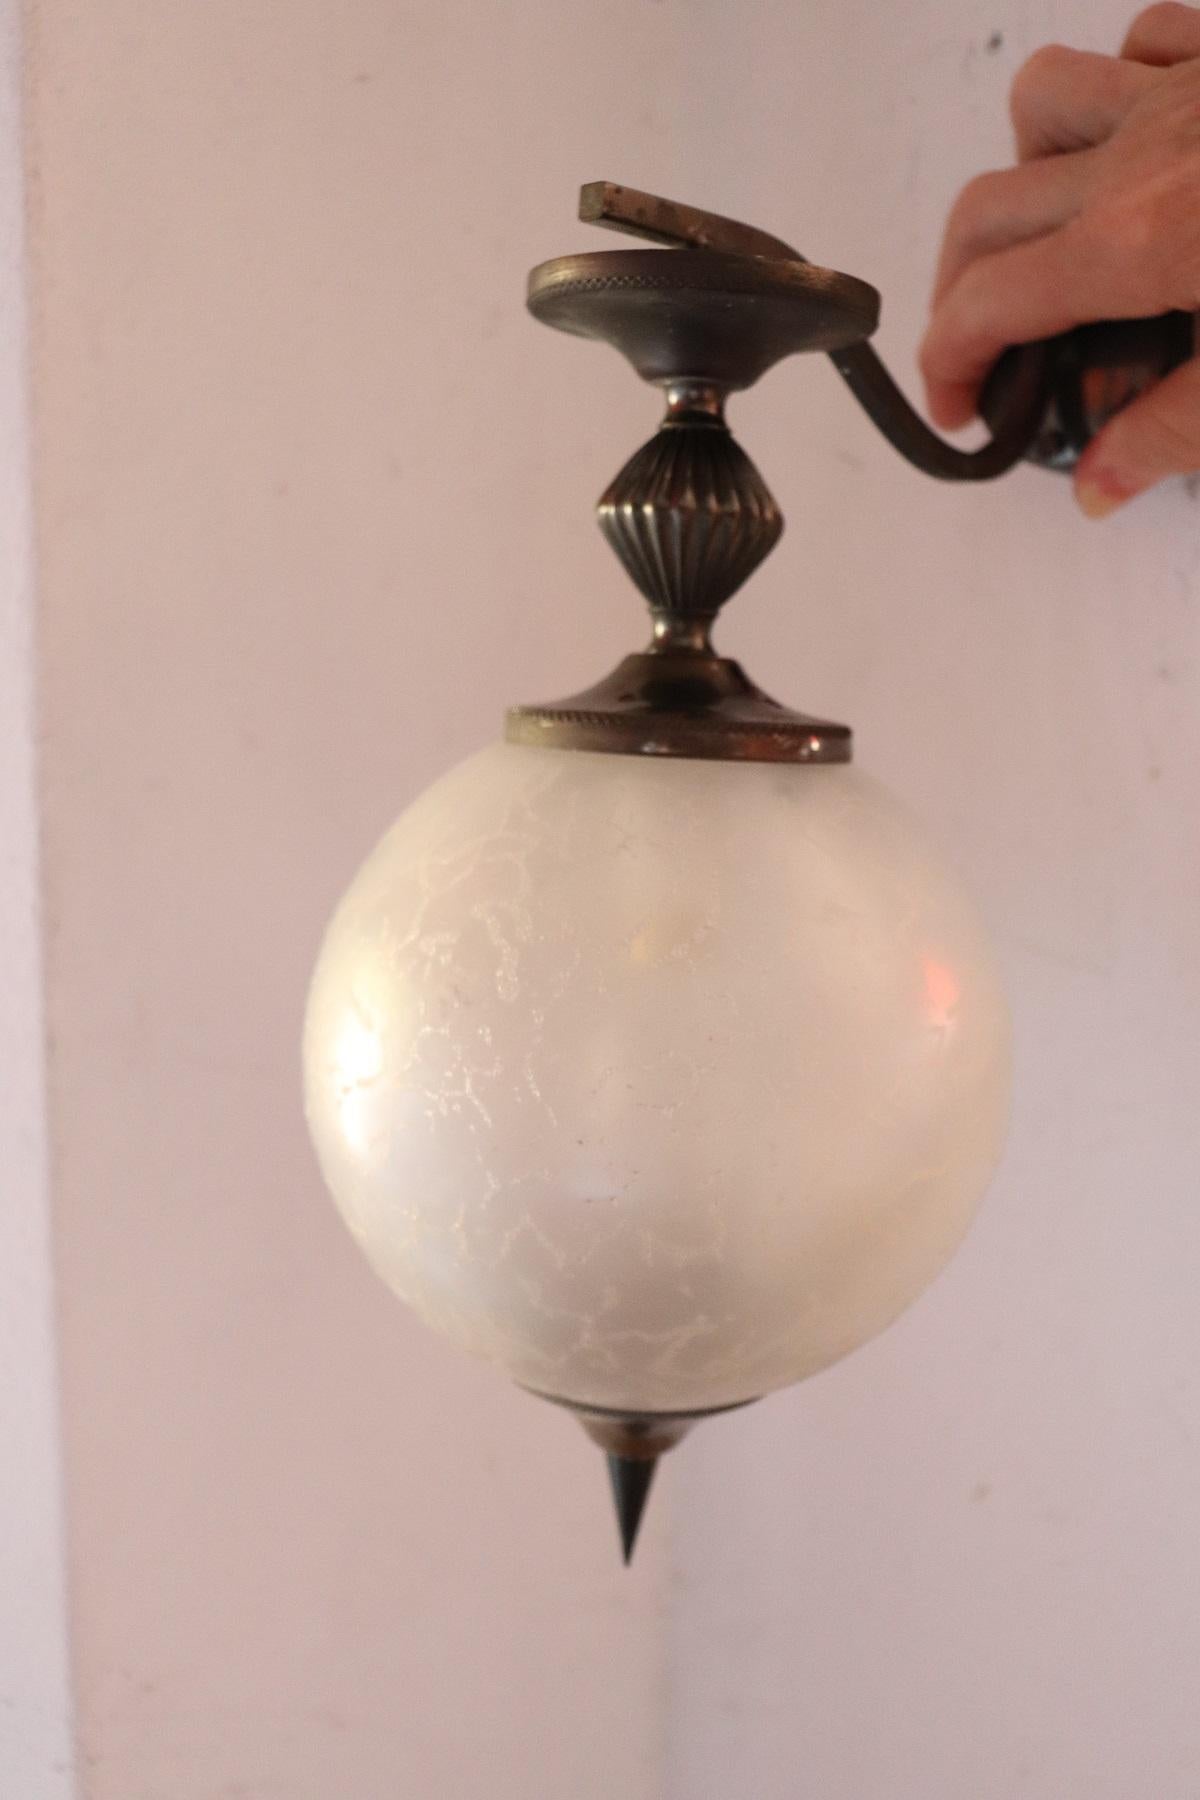 Beautiful and refined Italian pair of wall light or sconce one light. Made in bronze with large bowl in glazed and decorated artistic glass. Very decorative and large perfect for your wall.